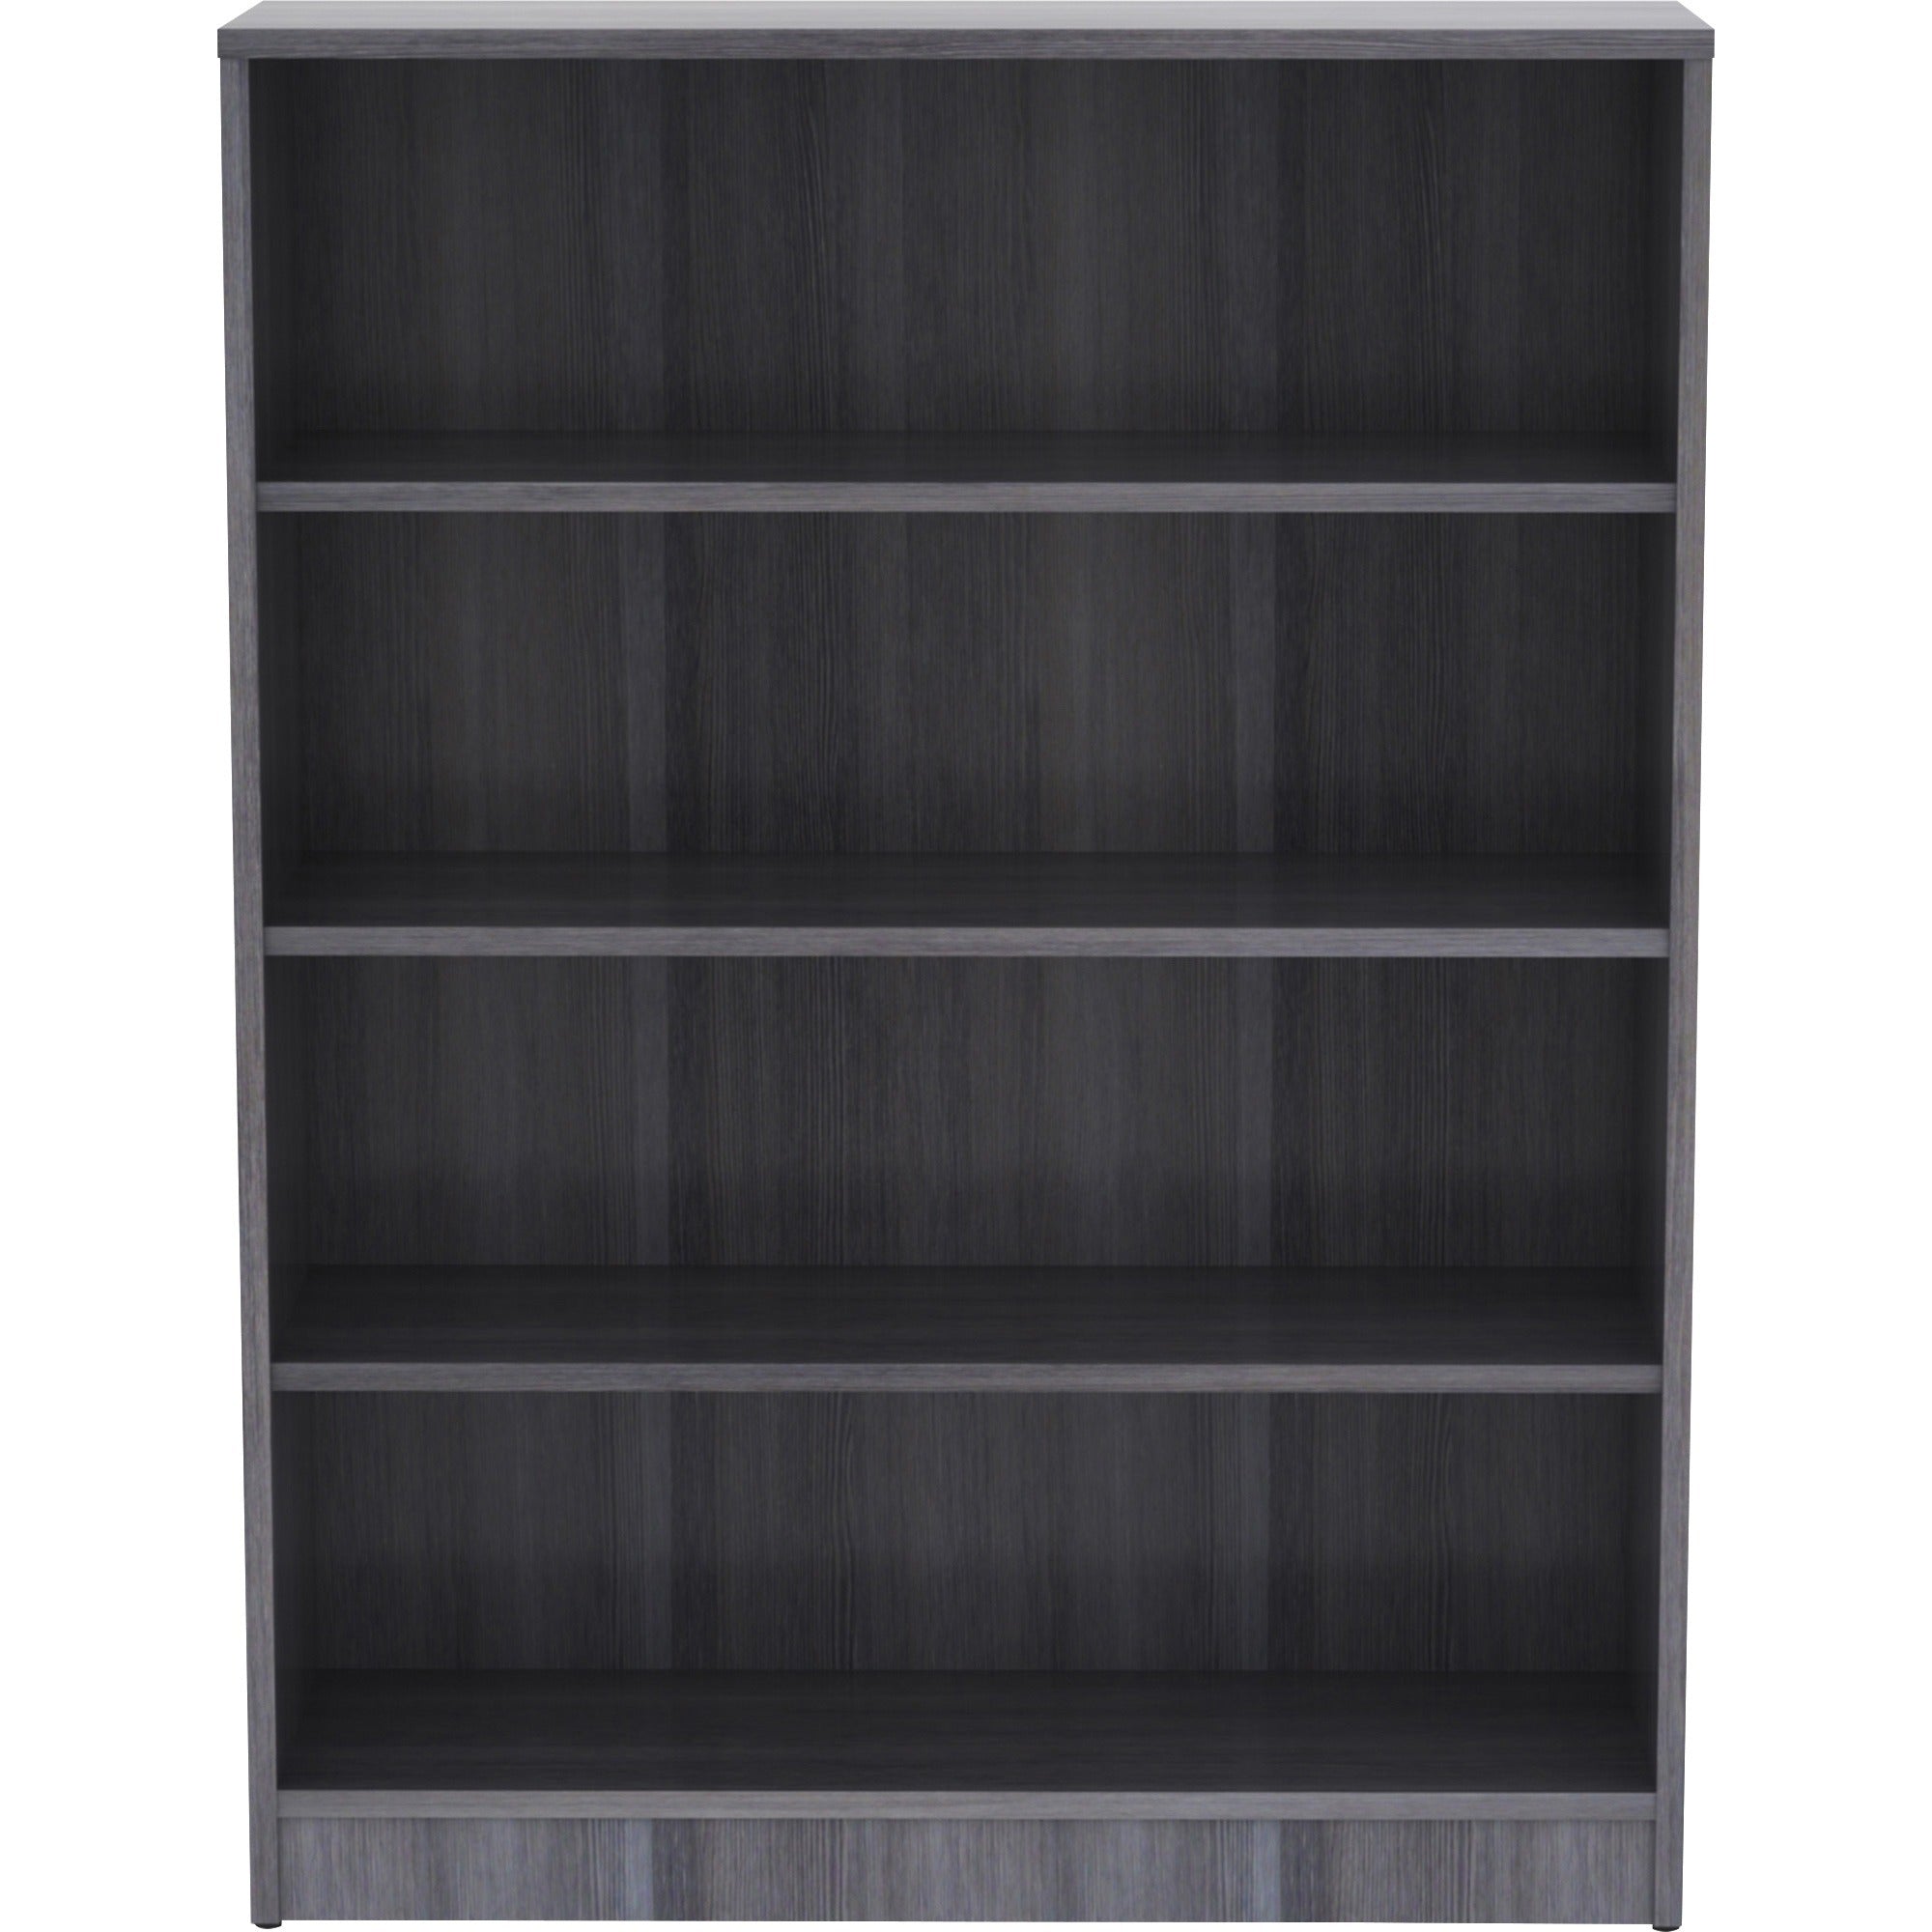 Lorell Laminate Bookcase - 4 Shelf(ves) - 48" Height x 36" Width x 12" Depth - Thermally Fused Laminate - 1 Each - 2